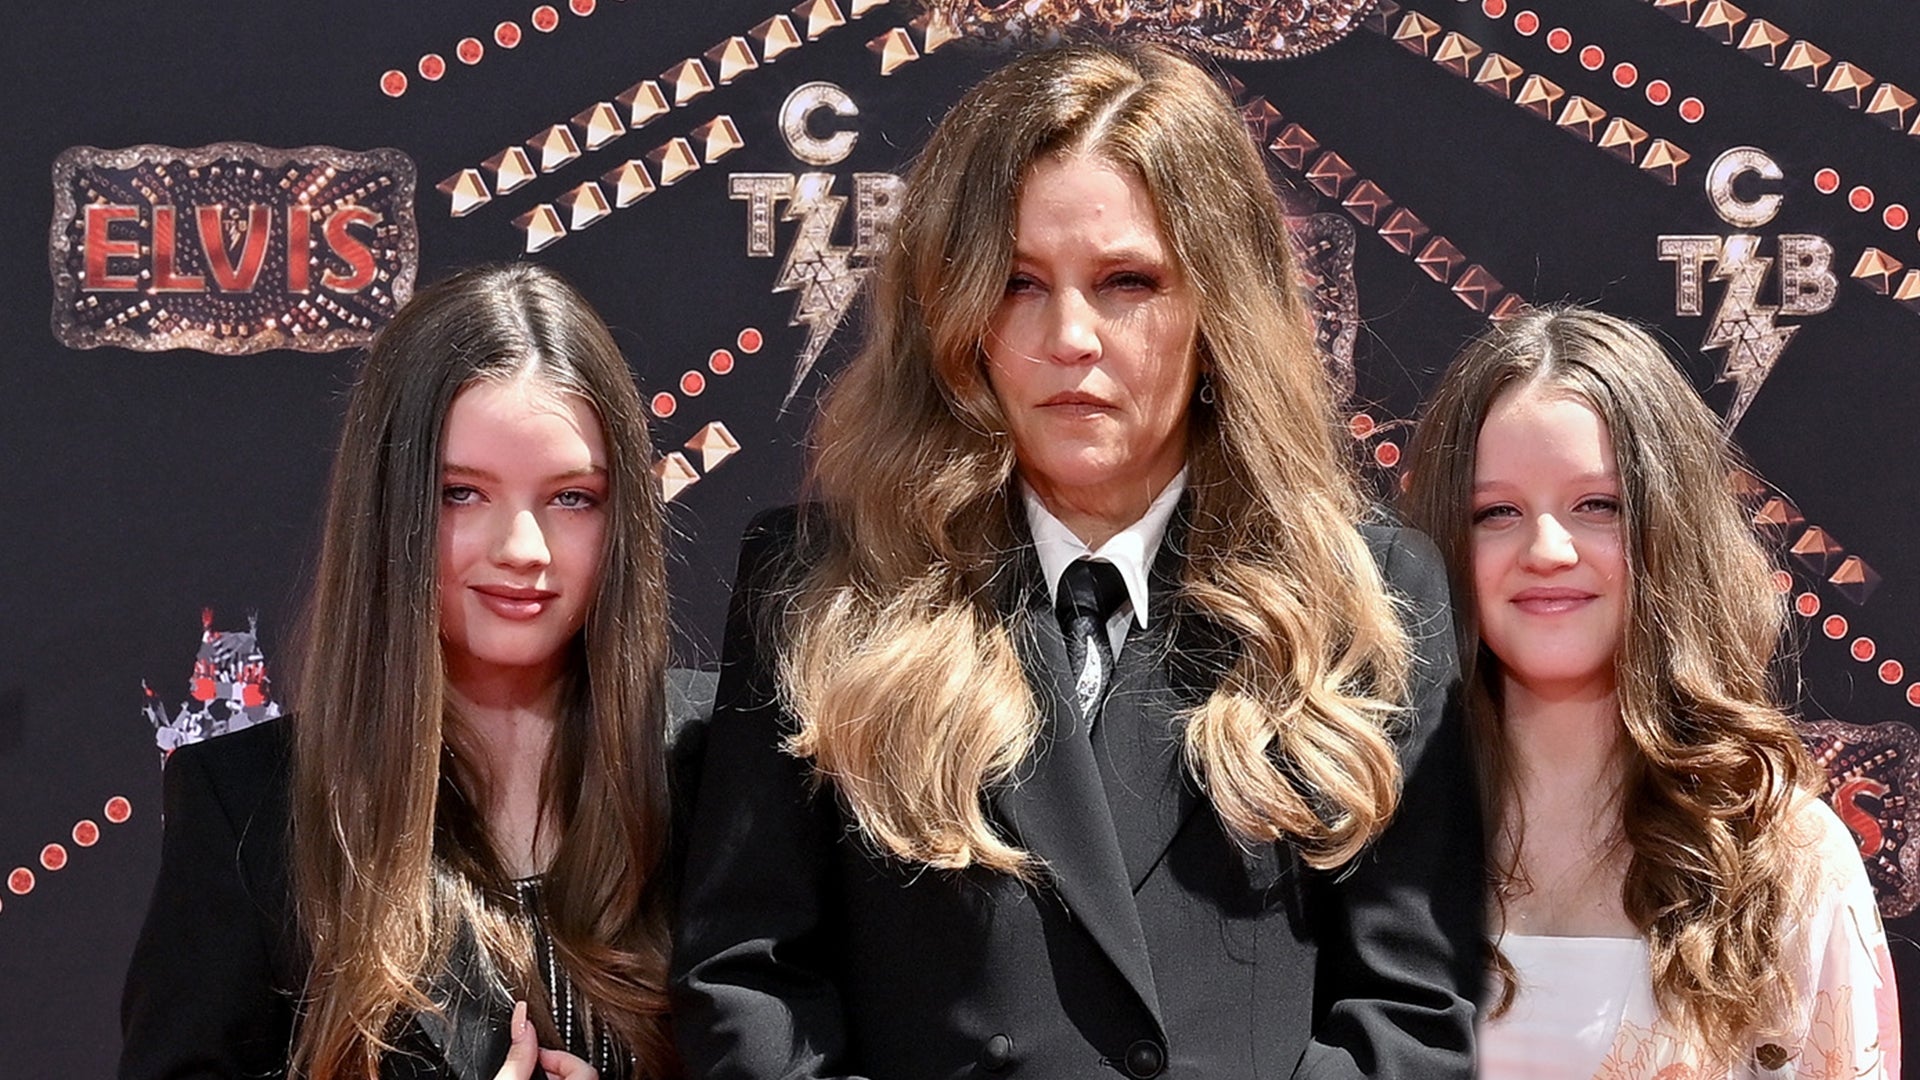 Lisa Marie Presley: How Twin Daughters Are Being Supported by Family (Source)